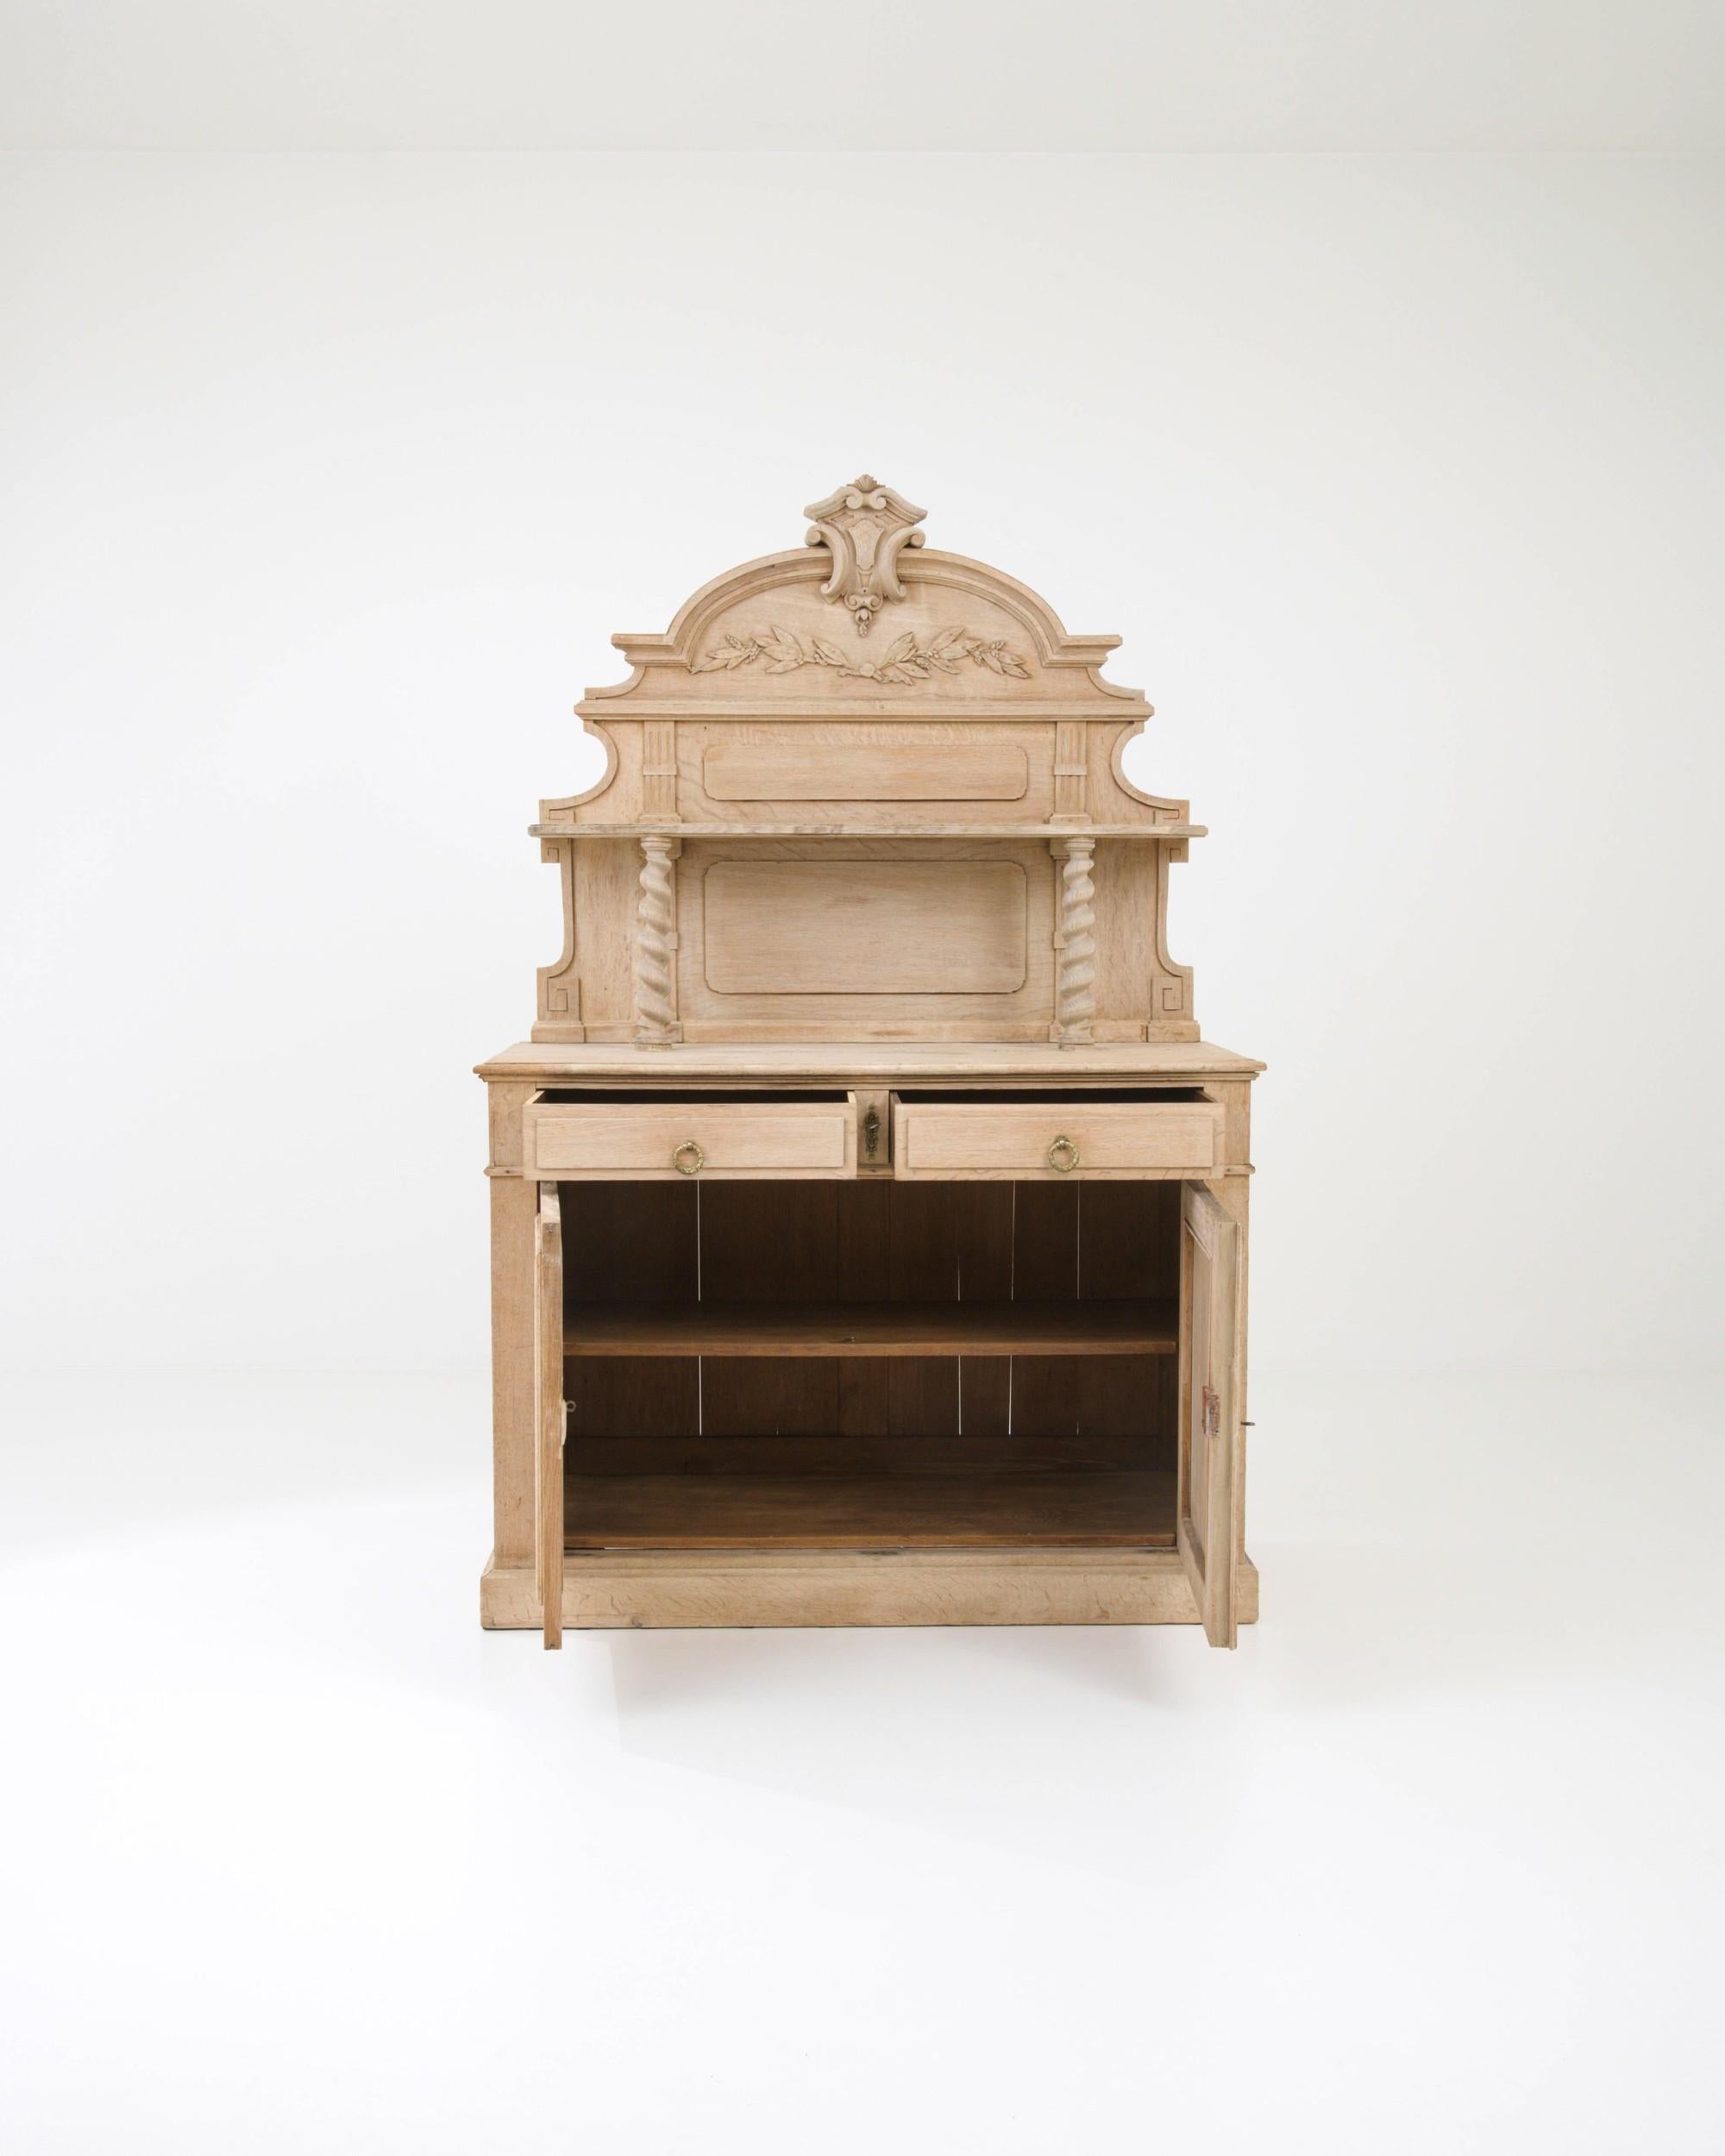 Neoclassical Revival 19th Century Belgian Bleached Oak Buffet with Sculpted Shelf For Sale